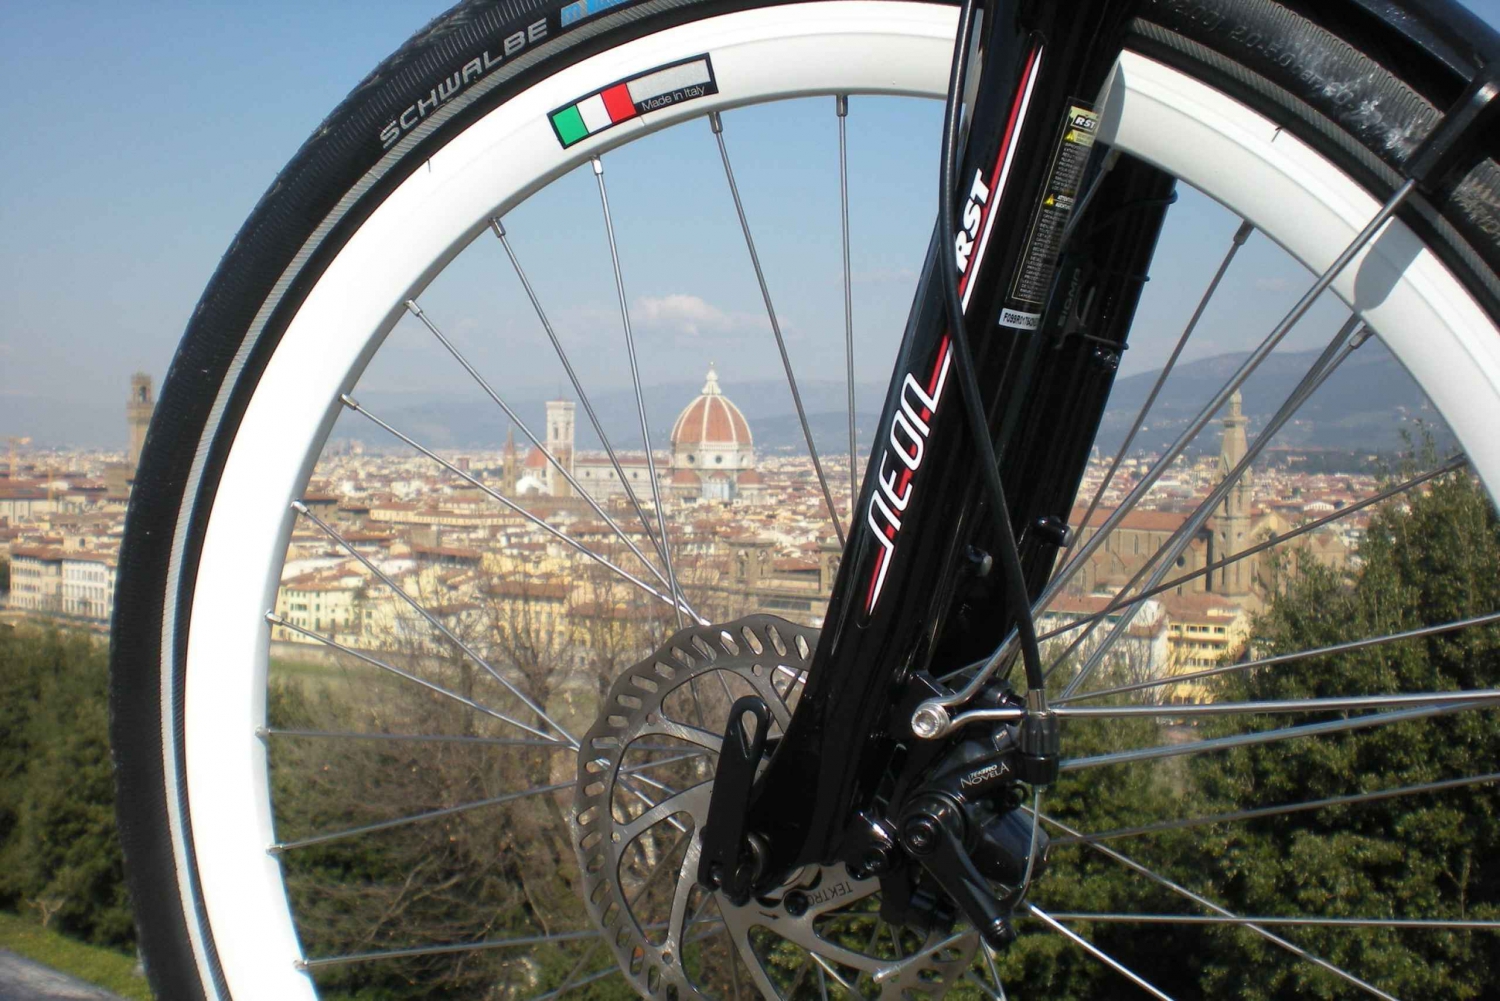 Florence: Electric Bike Tour with Wine & Local Products